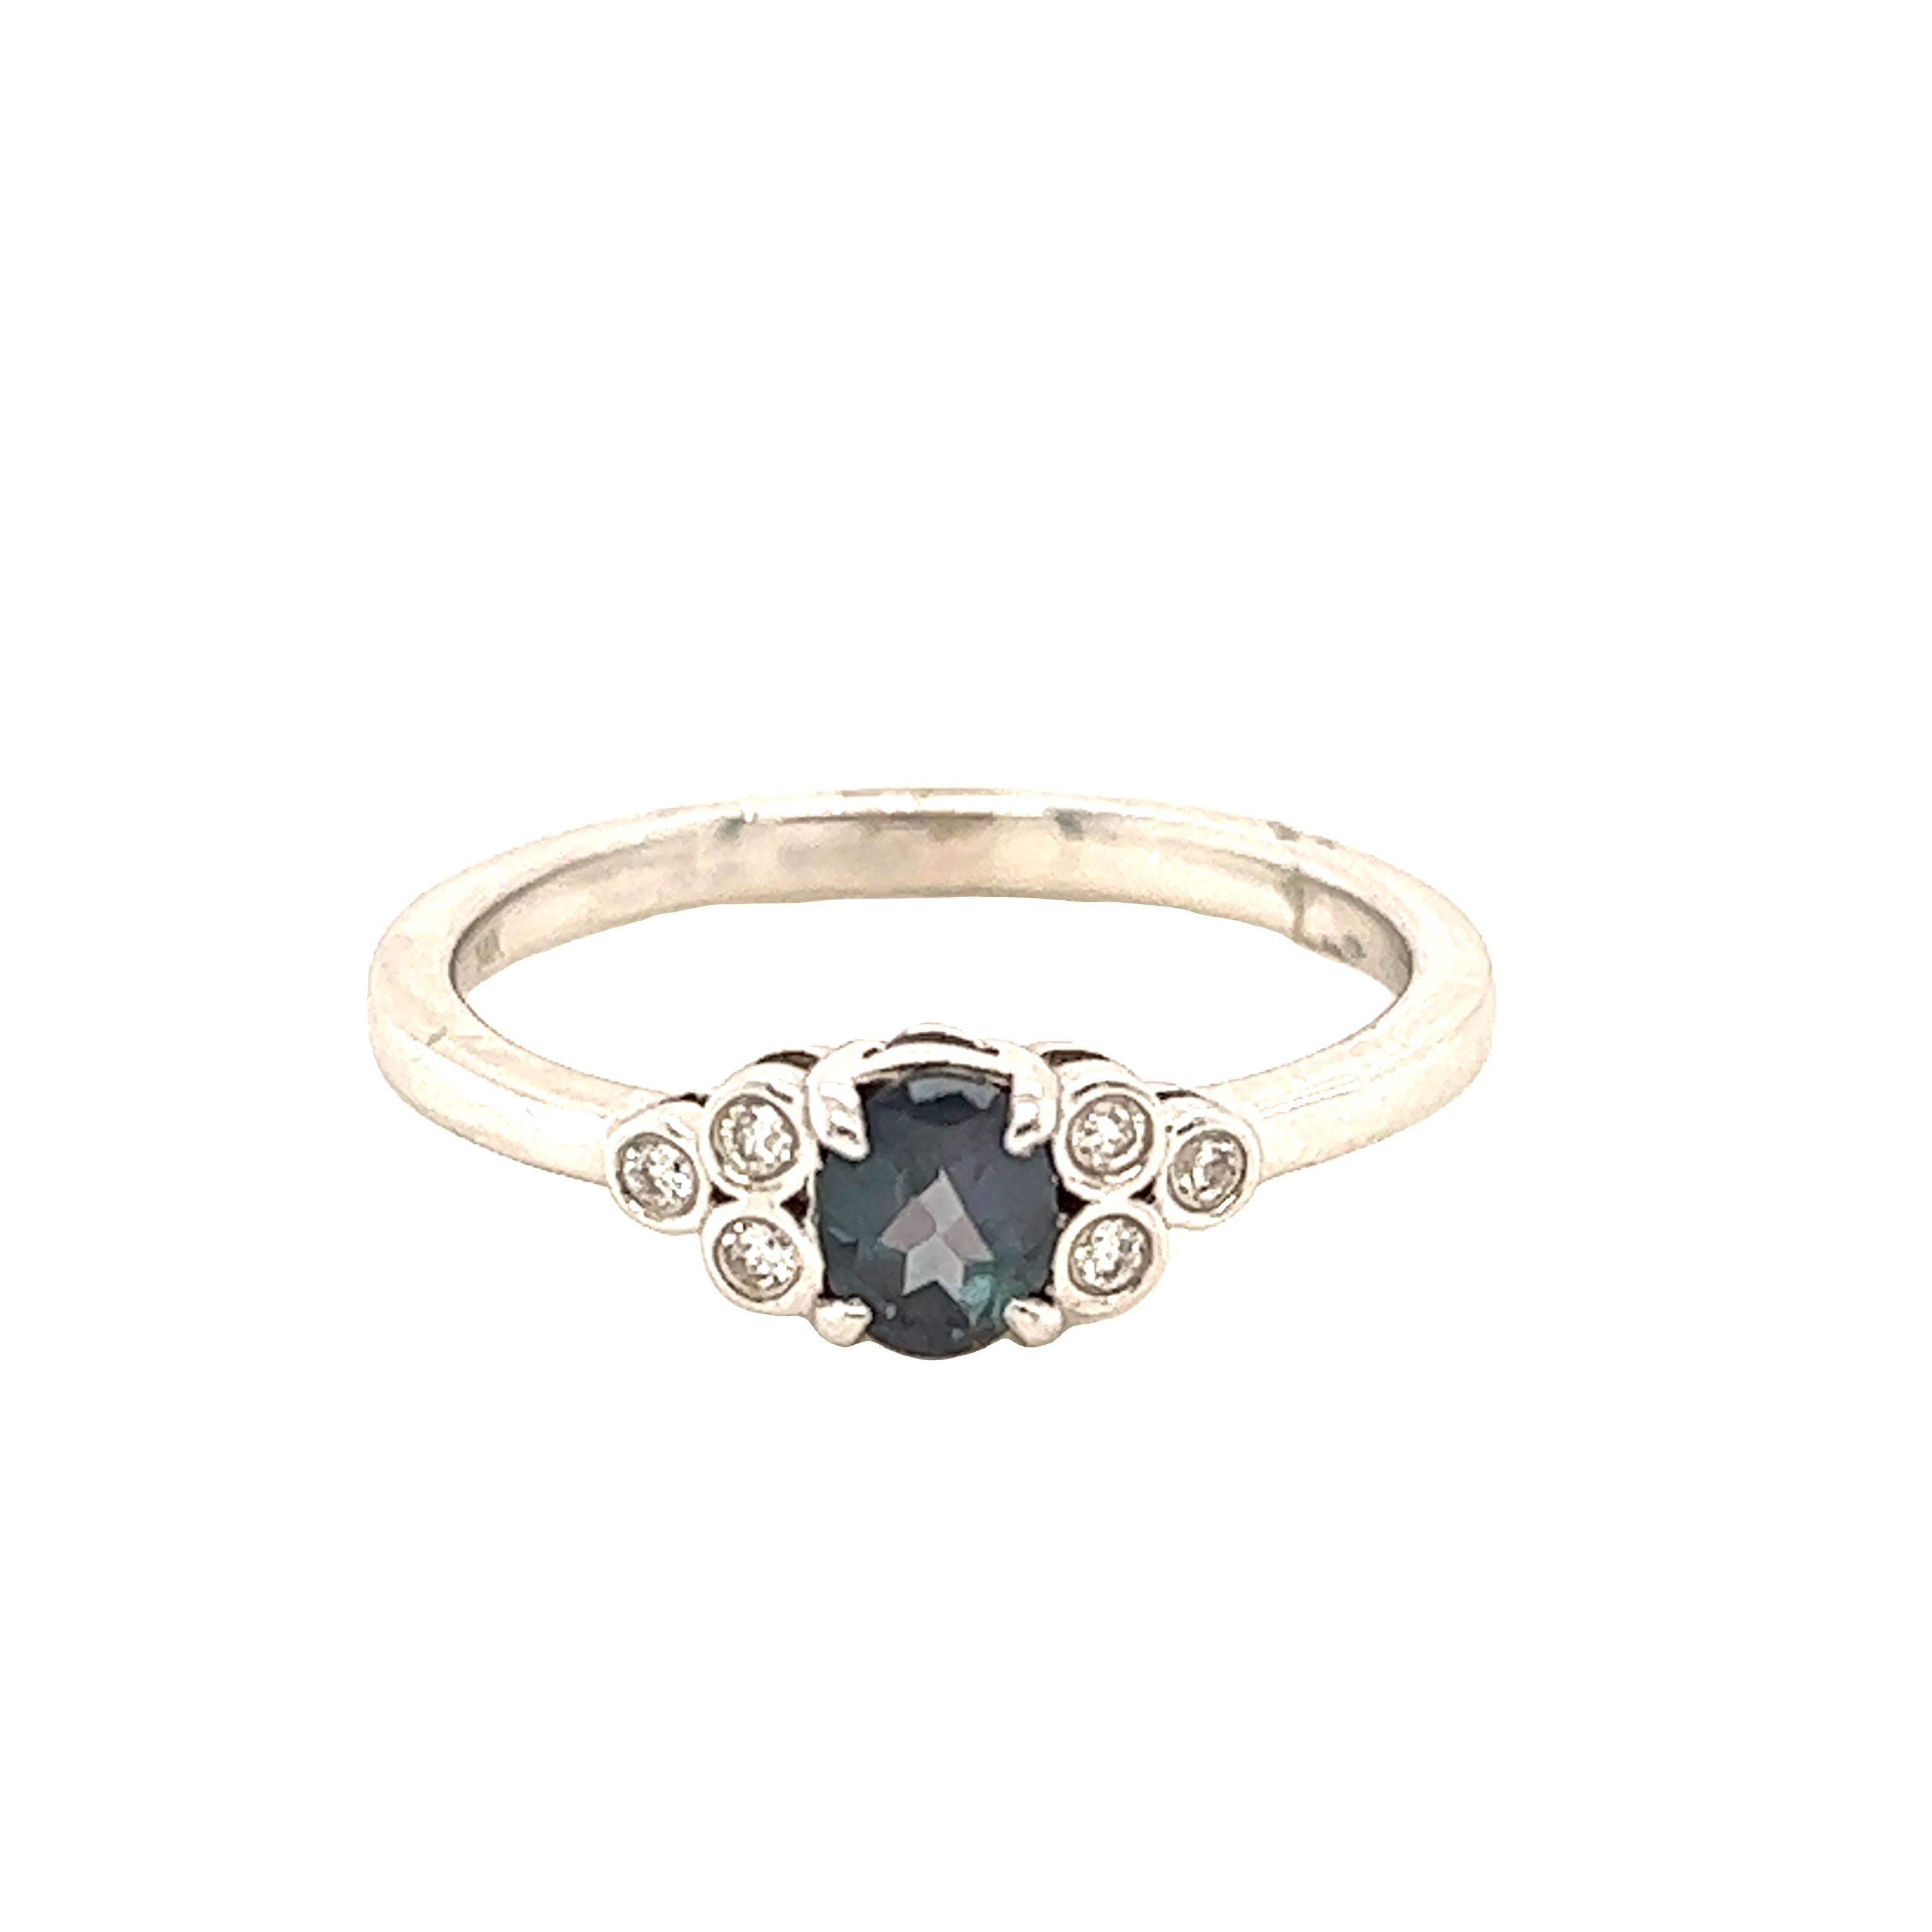 This is a gorgeous natural AAA quality oval Alexandrite surrounded by dainty diamonds that is set in a vintage platinum setting. This ring features a natural 0.39 carat oval alexandrite that is surrounded by brilliant white diamonds. The ring is a